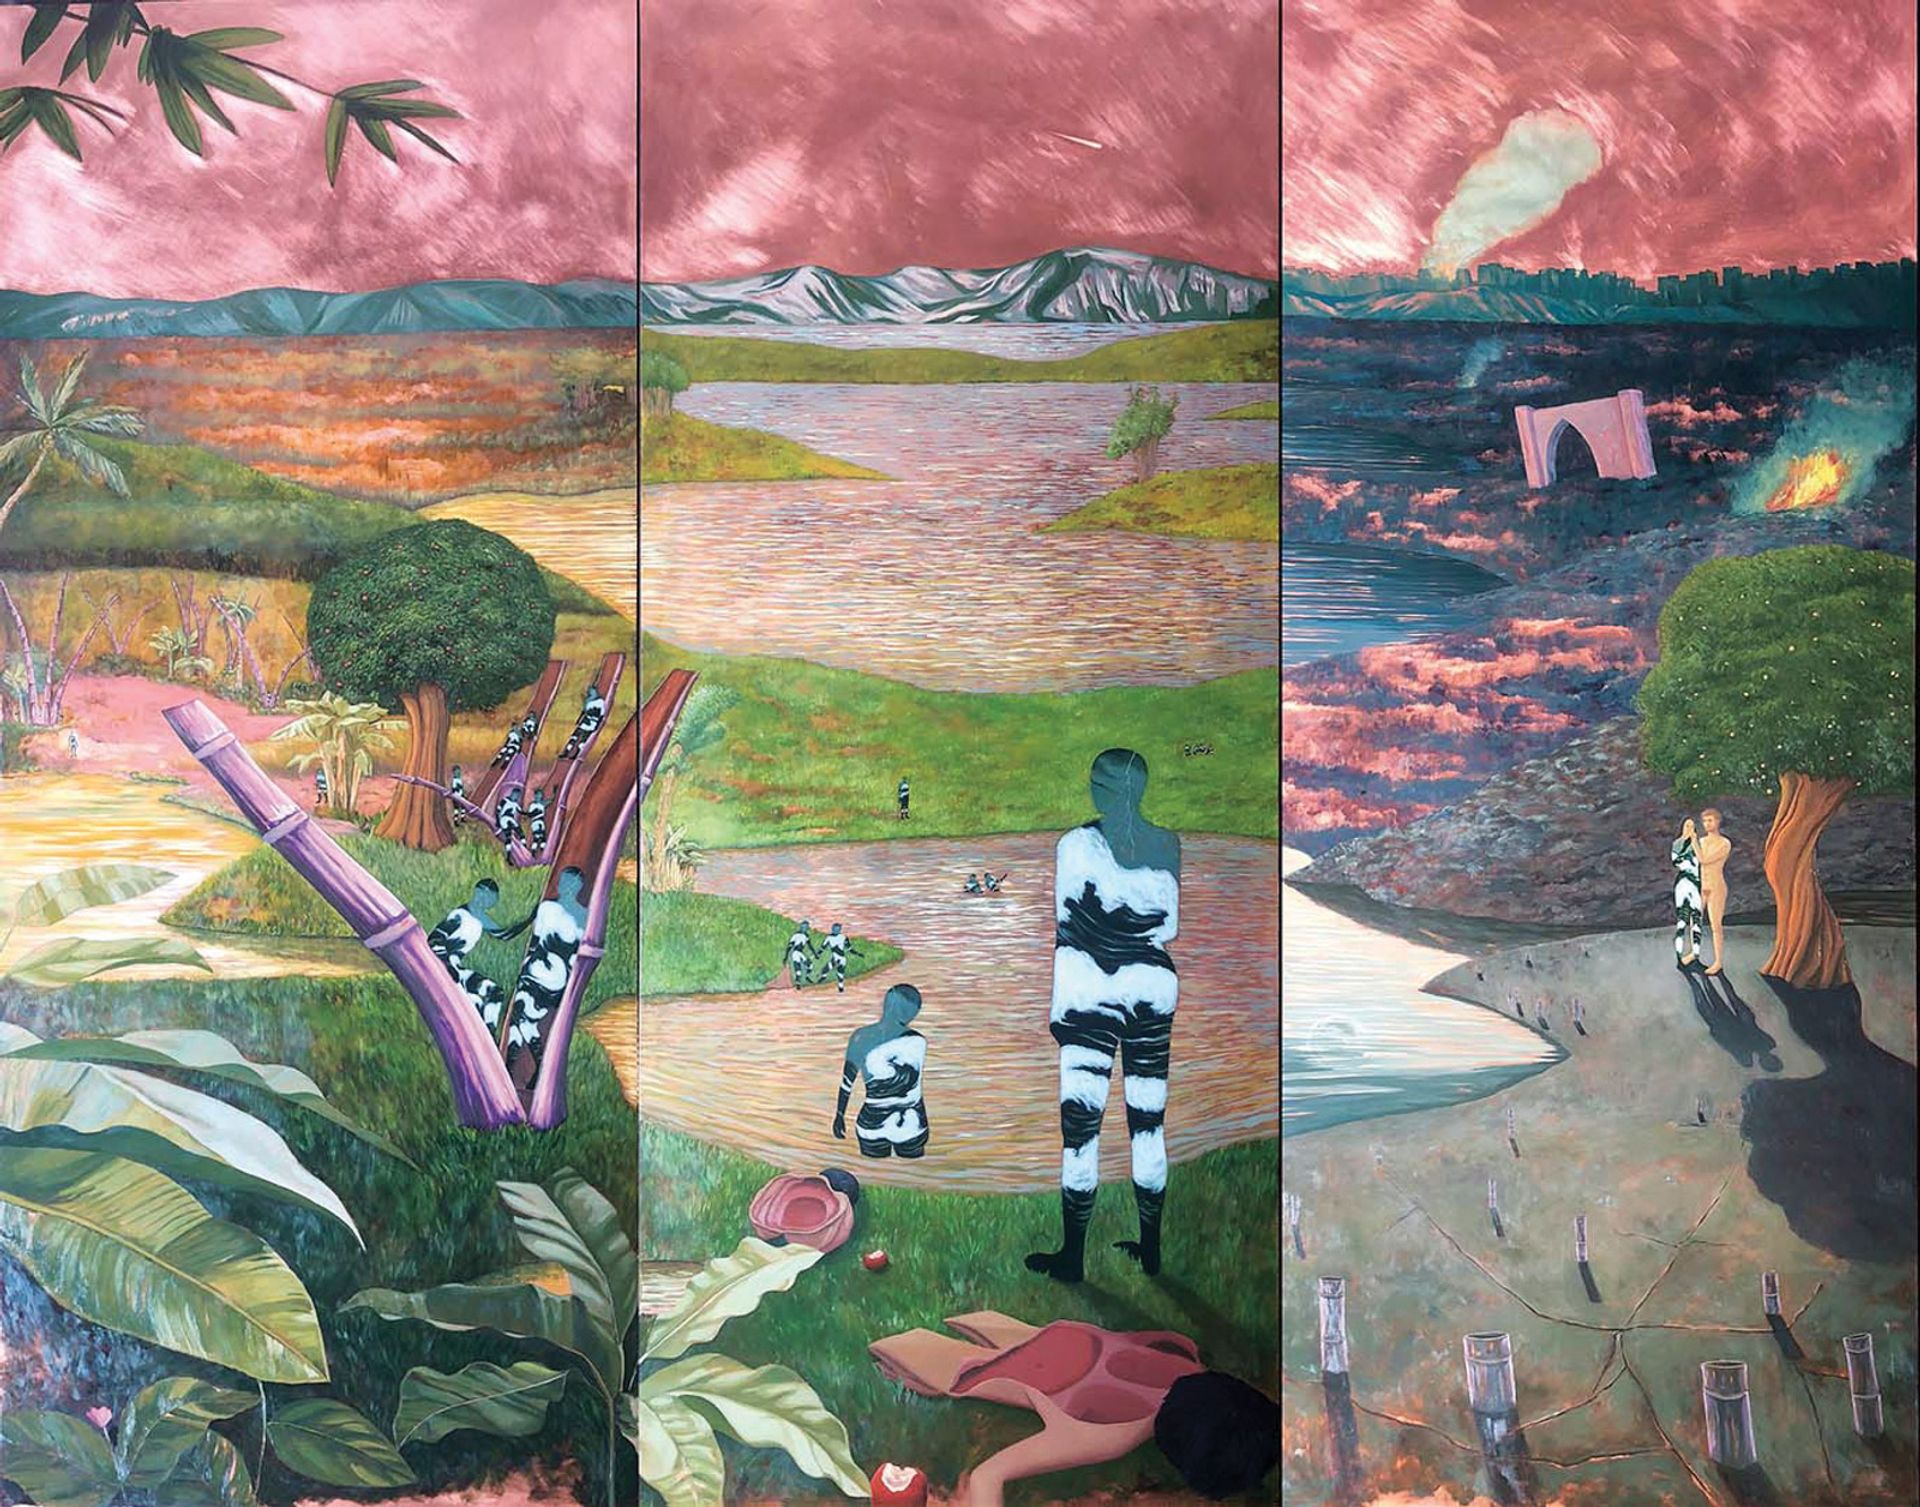 The Stories That Weren’t Told, 2019, by Filipino artist Lee Paje, is among the major new works on show at APT10 © Lee Paje; courtesy of the artist and Tin-aw Art Management